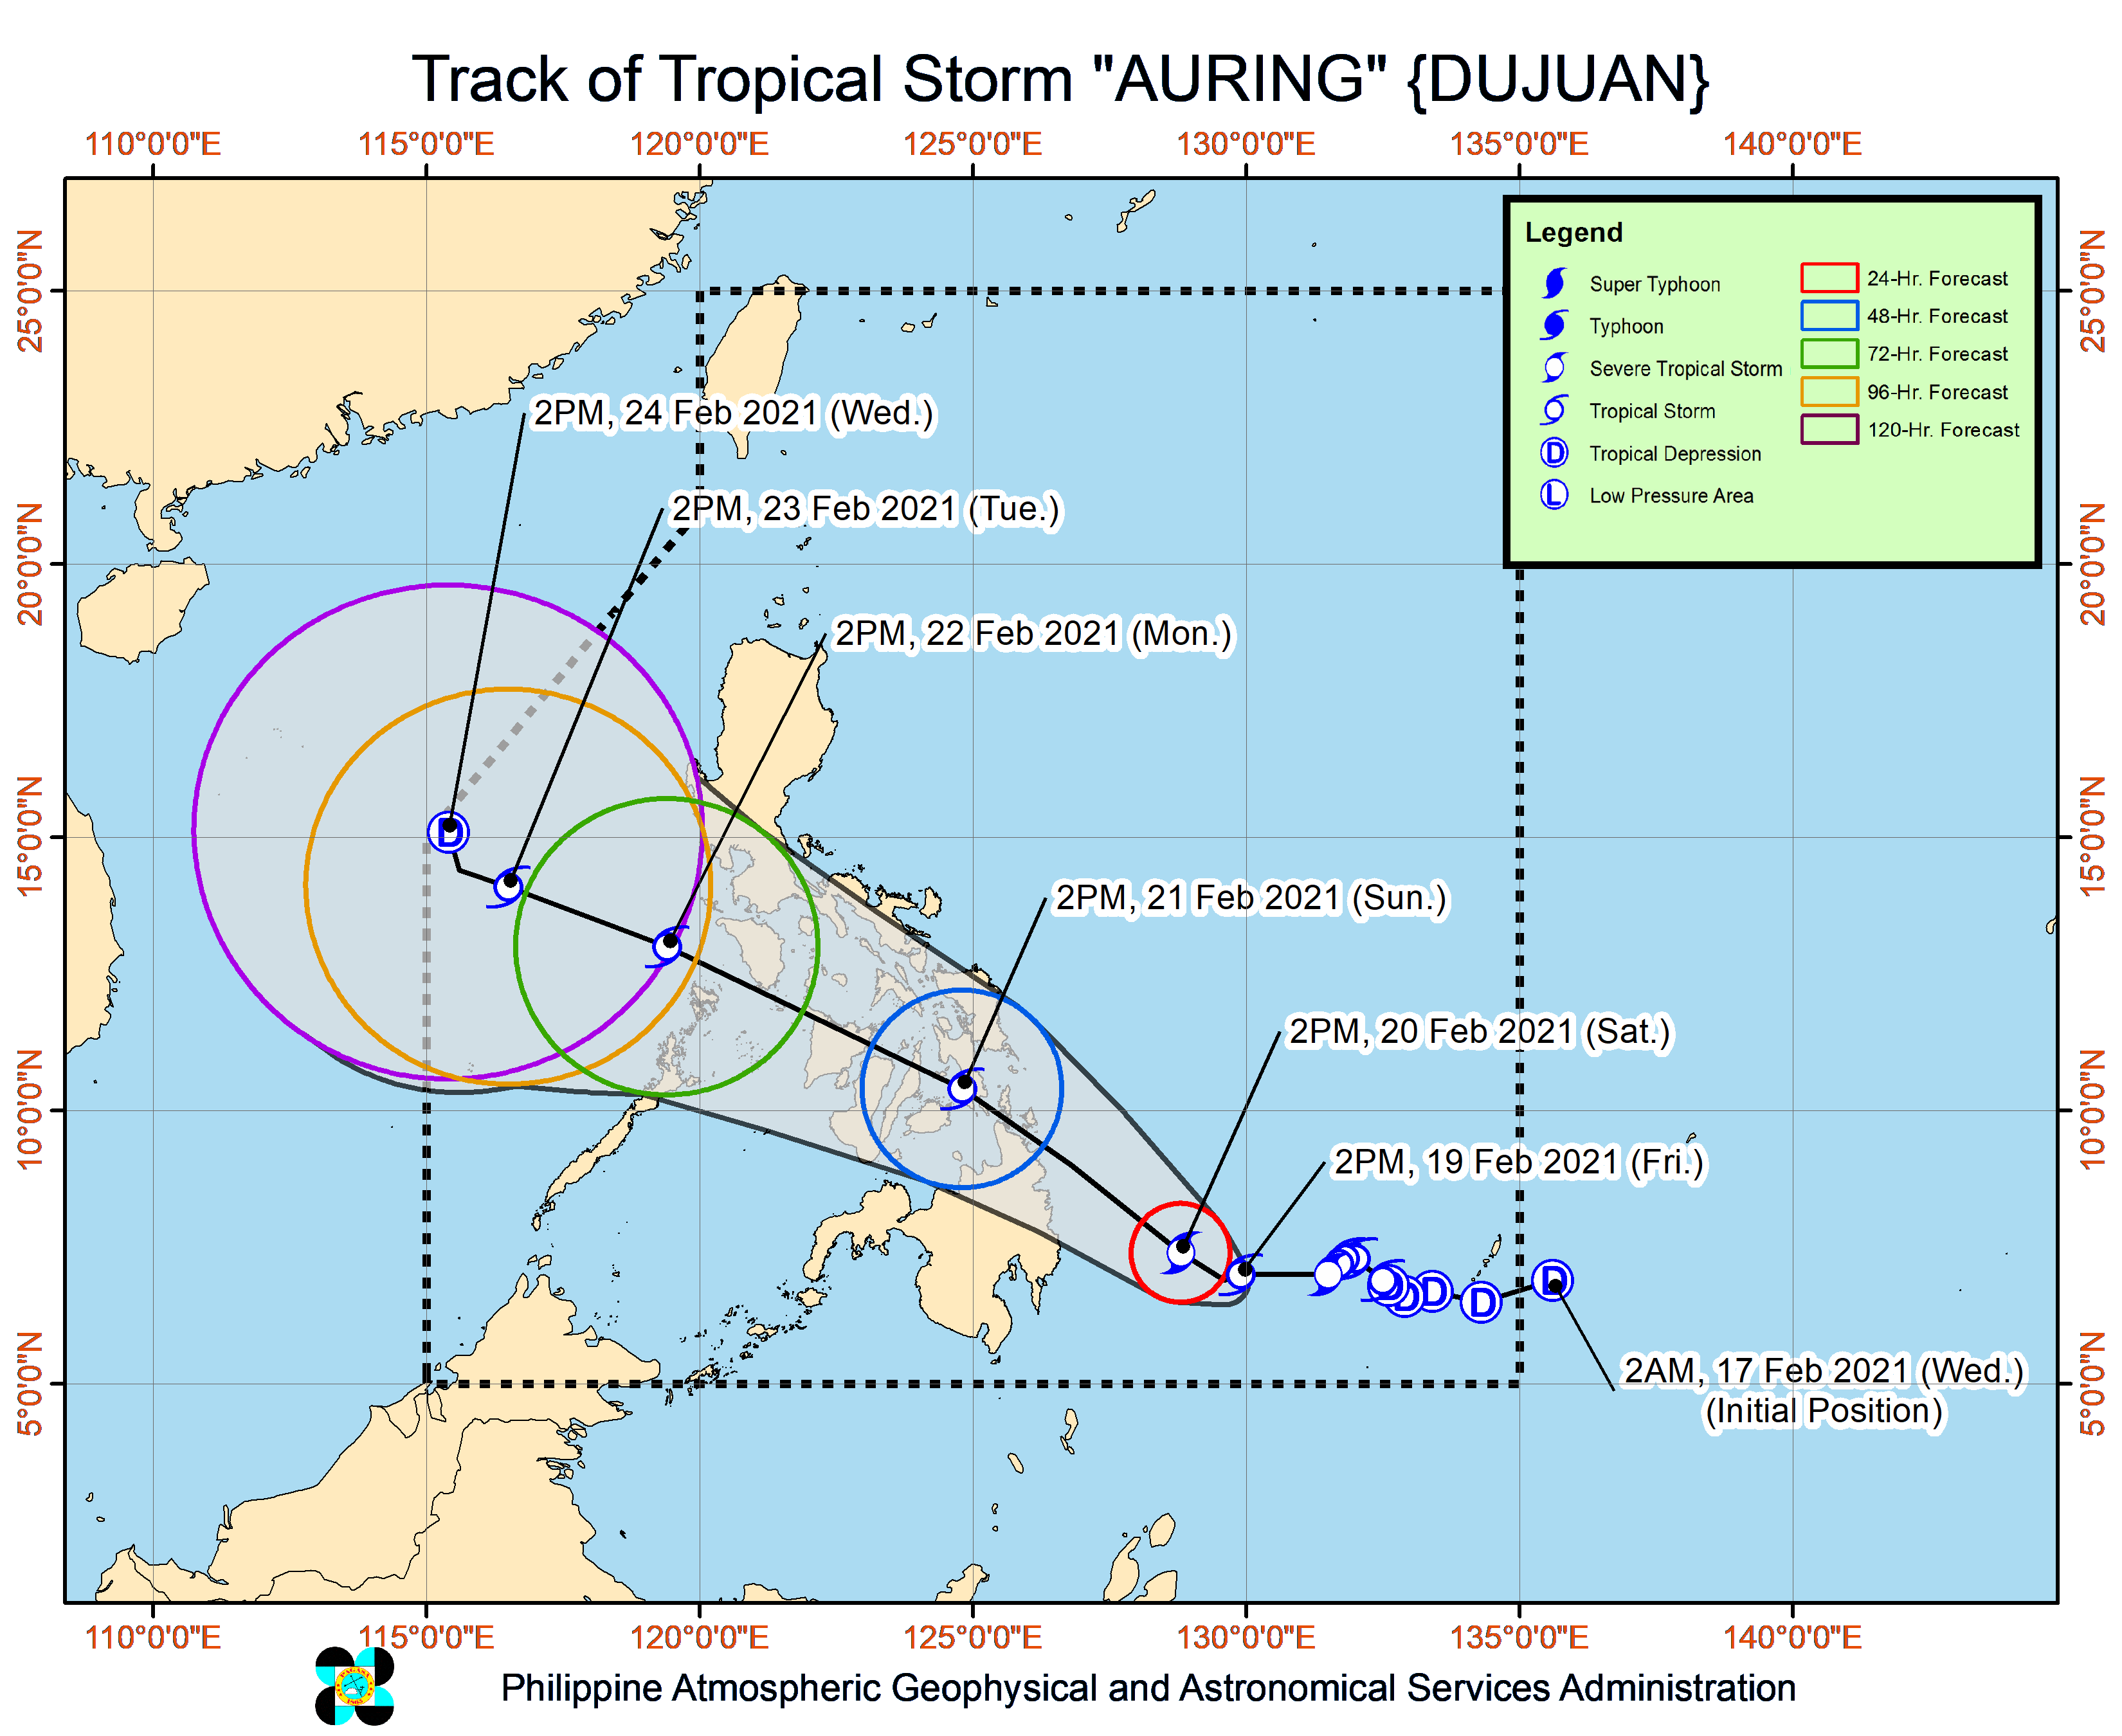 Auring weakens into tropical storm, but more areas under Signal No. 1 2